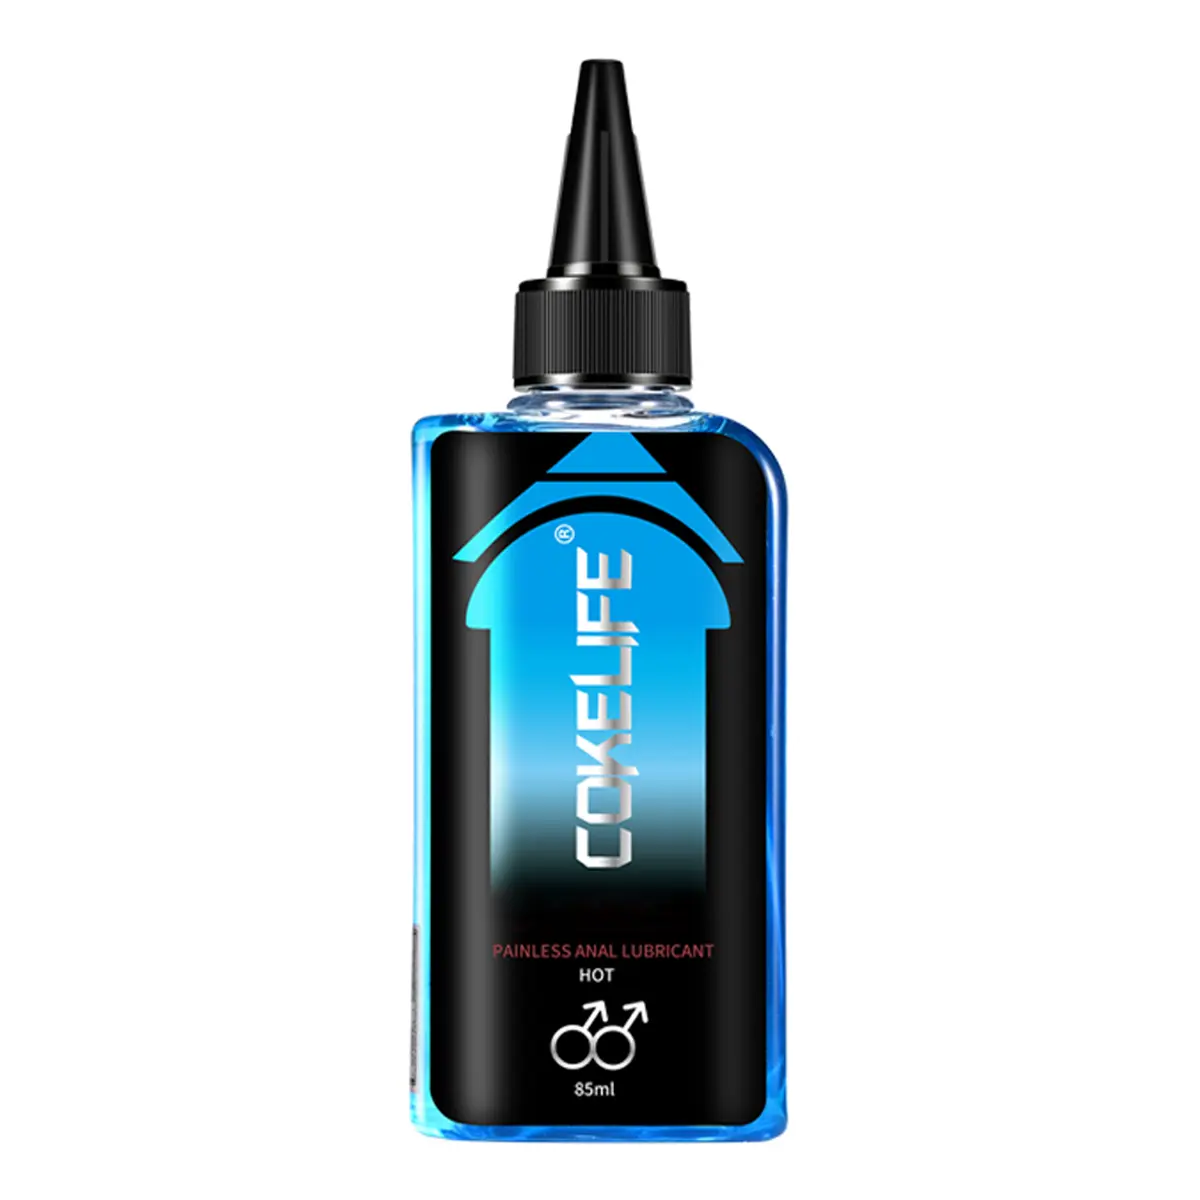 cooling lubricate，tingling lube couples，flavored waterbased lube，polyurethane condom lube，proceed lube，tingling lubr，water base lube，cooling sensation lubricant，lubricante con menta，anal cooling lube，water based lube for men gay